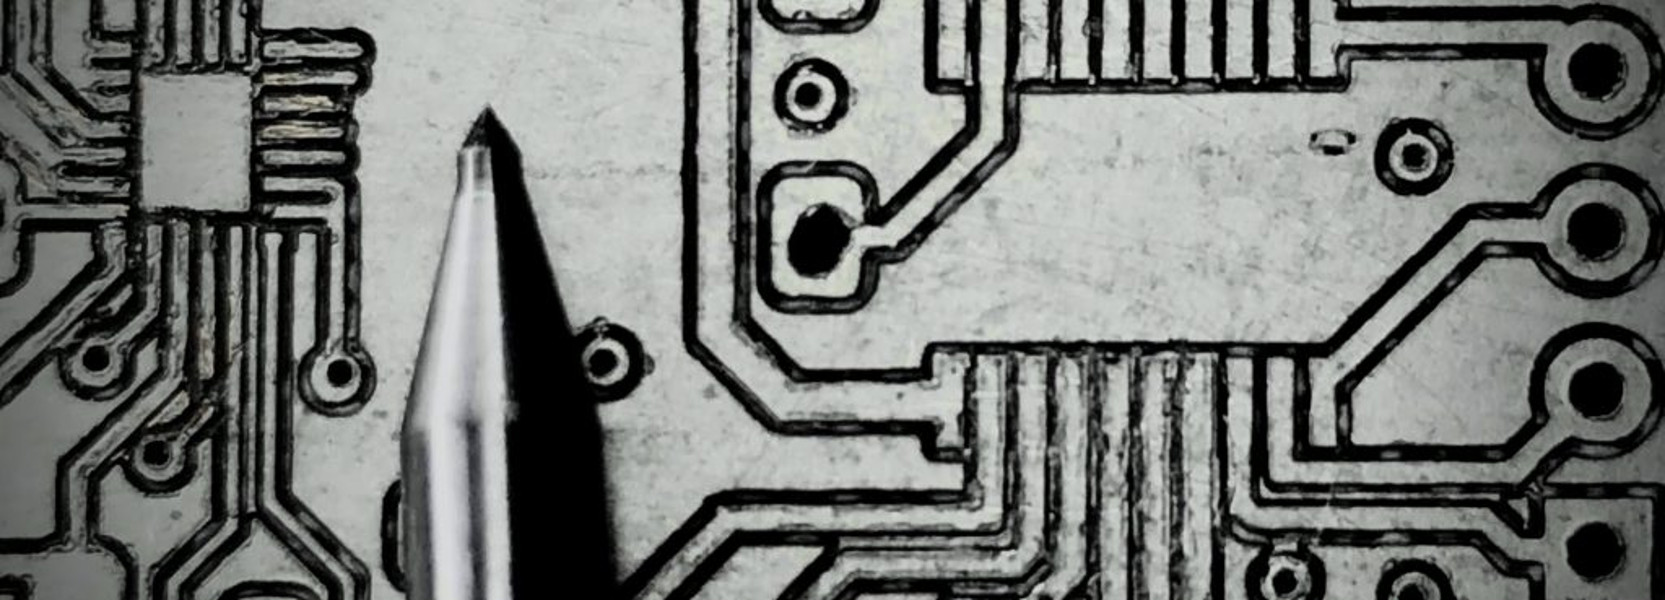 A Better Way to Build PCBs